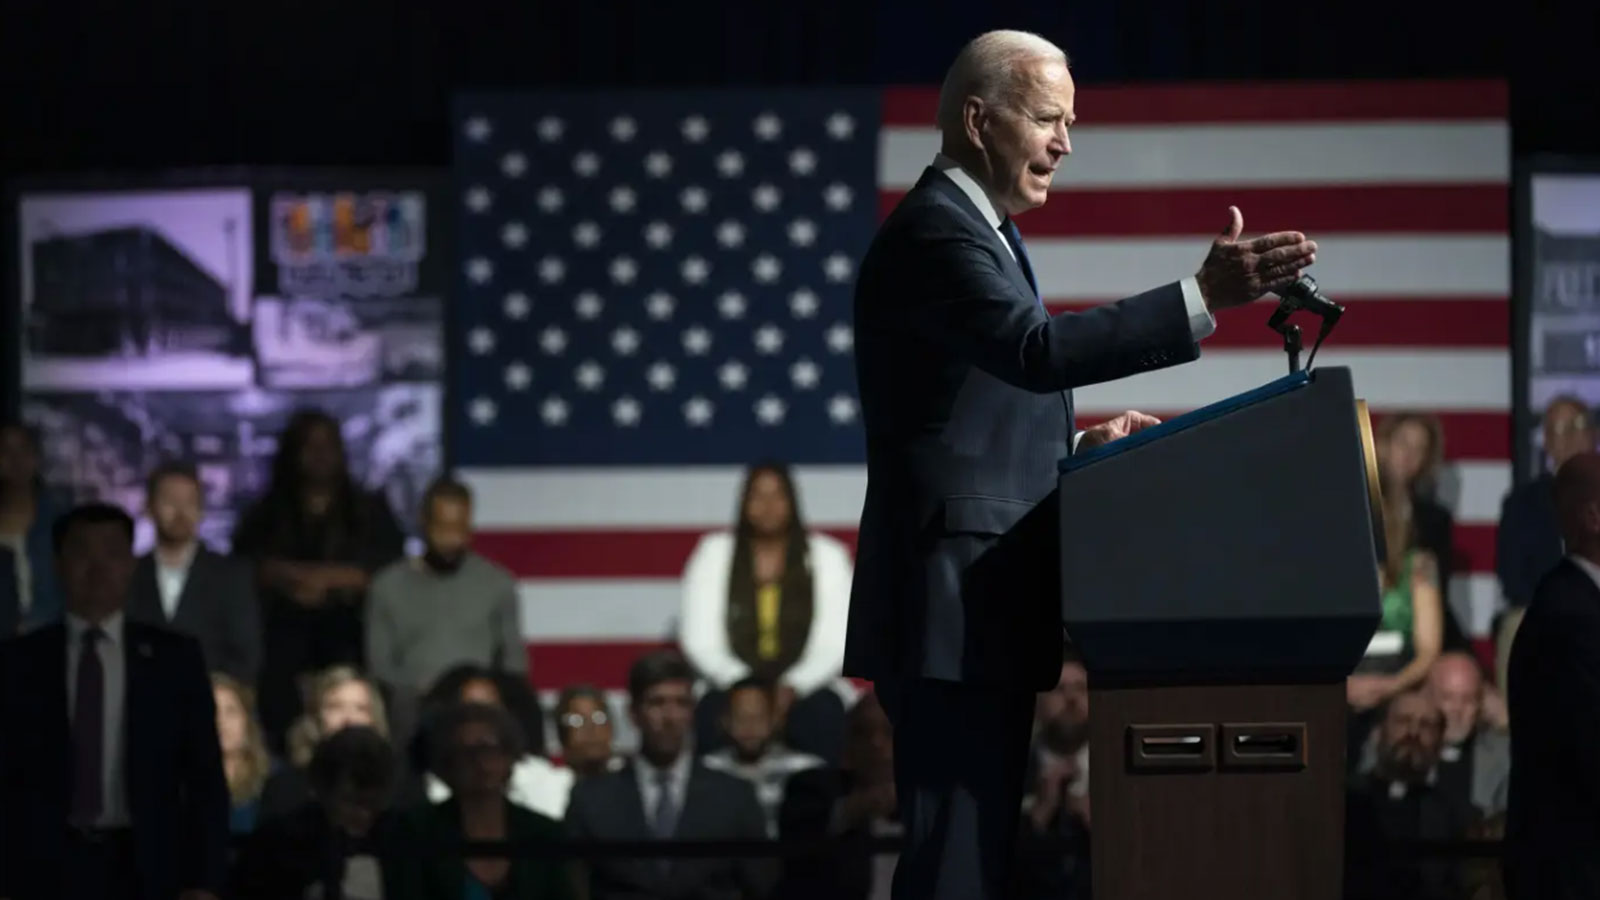 President Joe Biden speaks as he commemorates the 100th anniversary of the Tulsa race massacre, at the Greenwood Cultural Center, Tuesday, June 1, 2021, in Tulsa, Okla. 